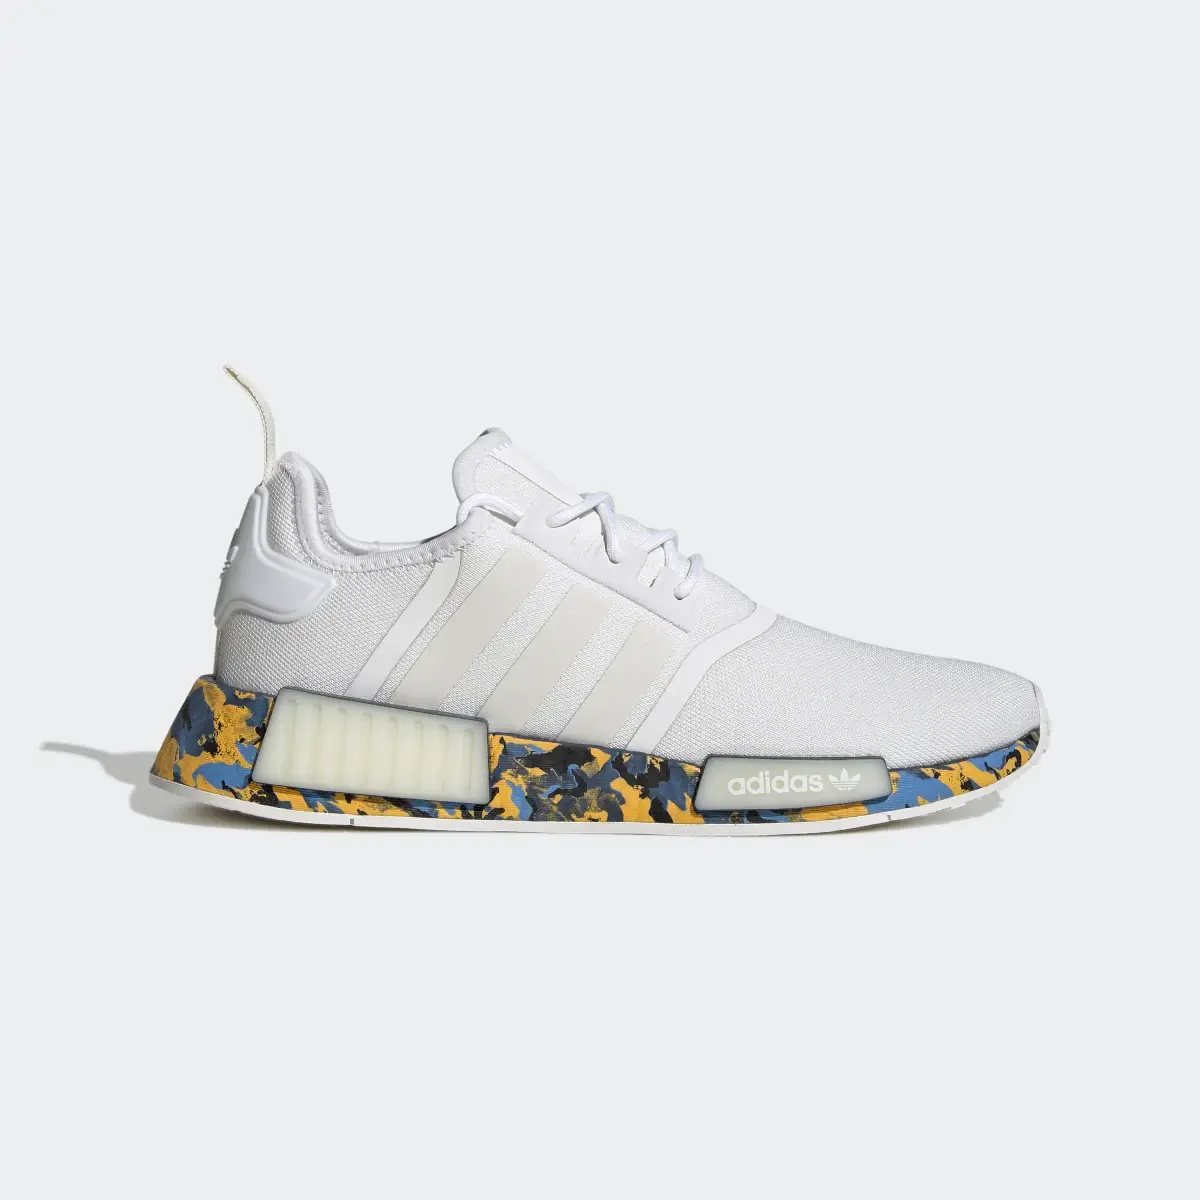 Adidas NMD Shoes. 2